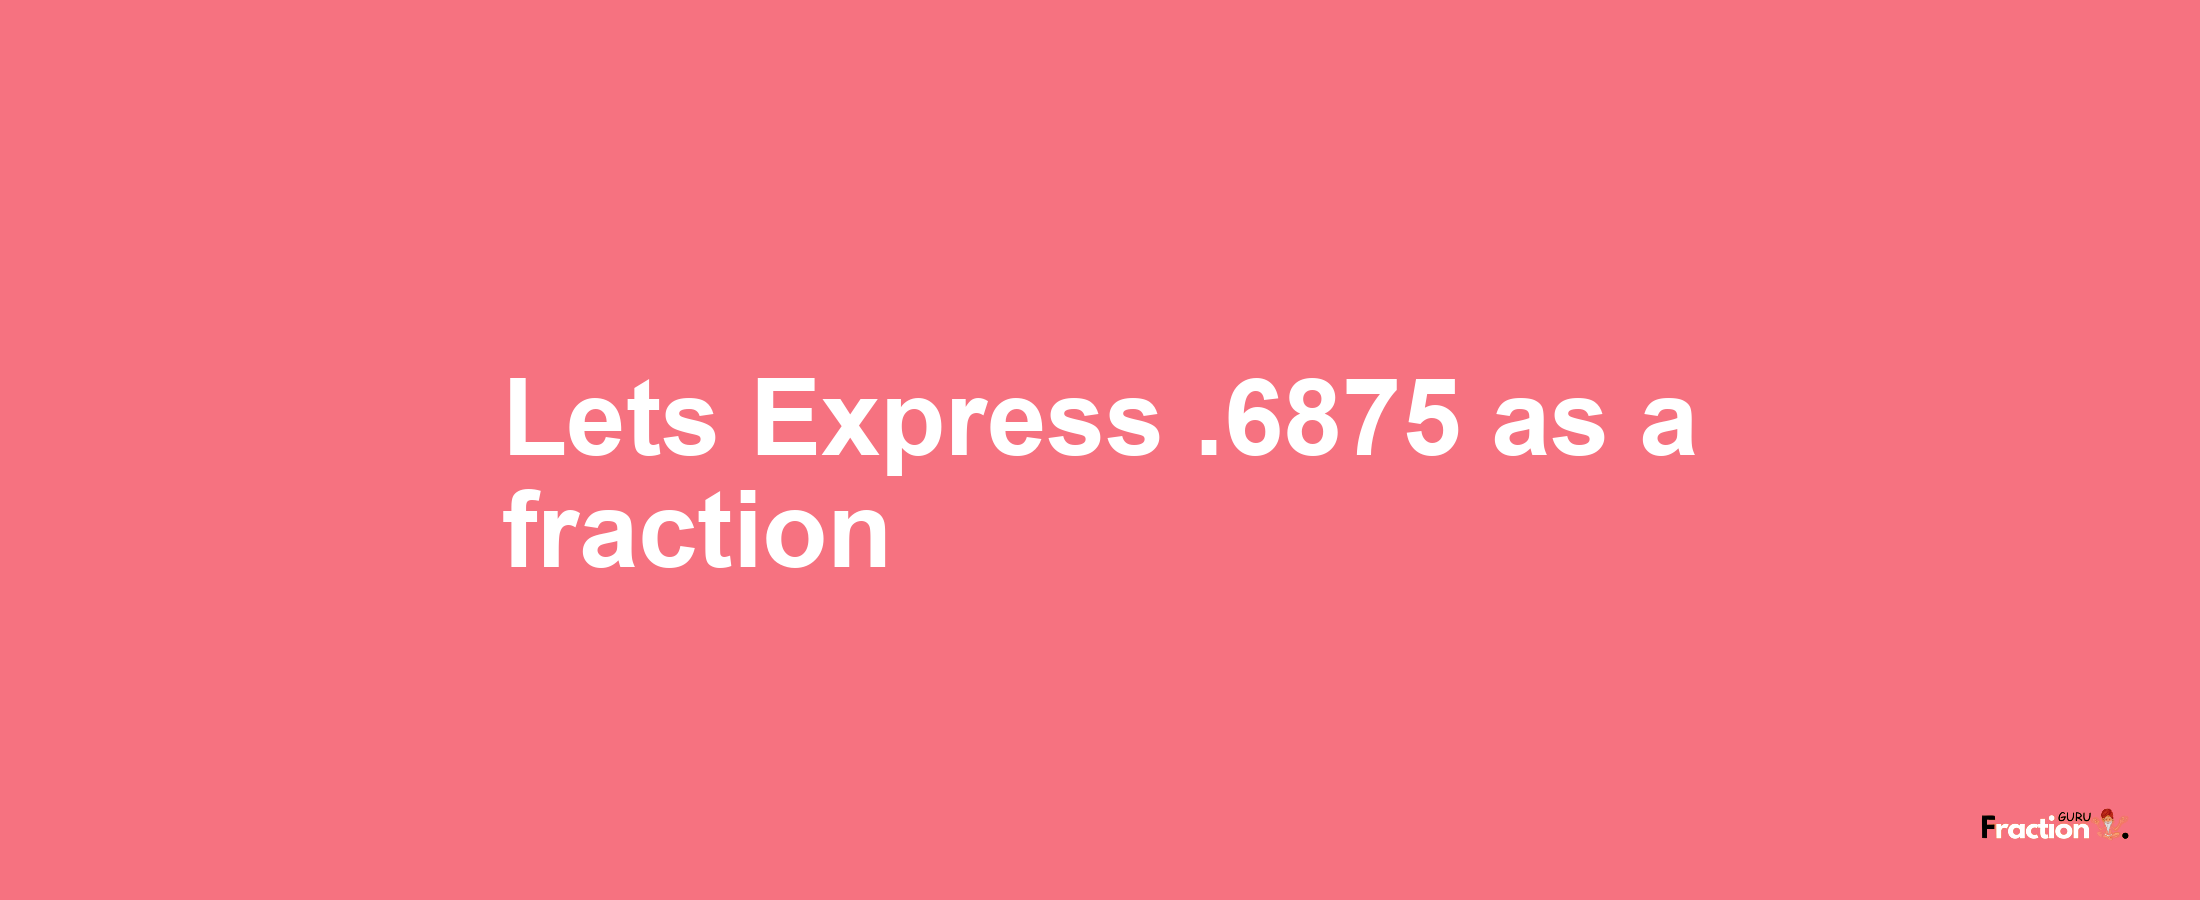 Lets Express .6875 as afraction